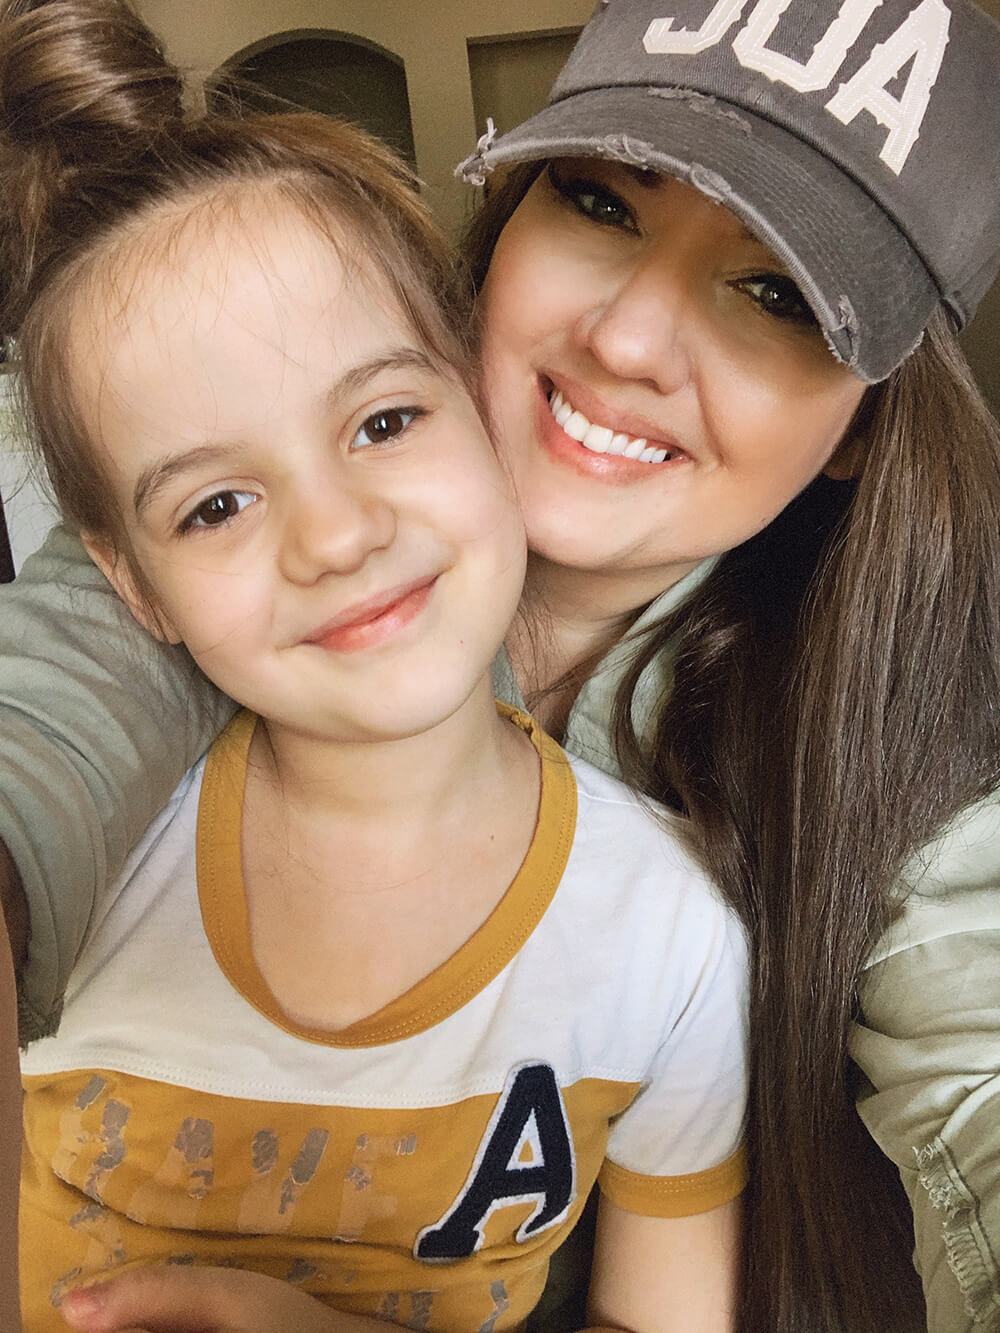 Six months since our Type 1 Diabetes diagnosis. Thought it would be a good time to share some more of our experience and what Type 1 Diabetes has taught me - both as a person as well as a mother. Read more on KaraLayne.com